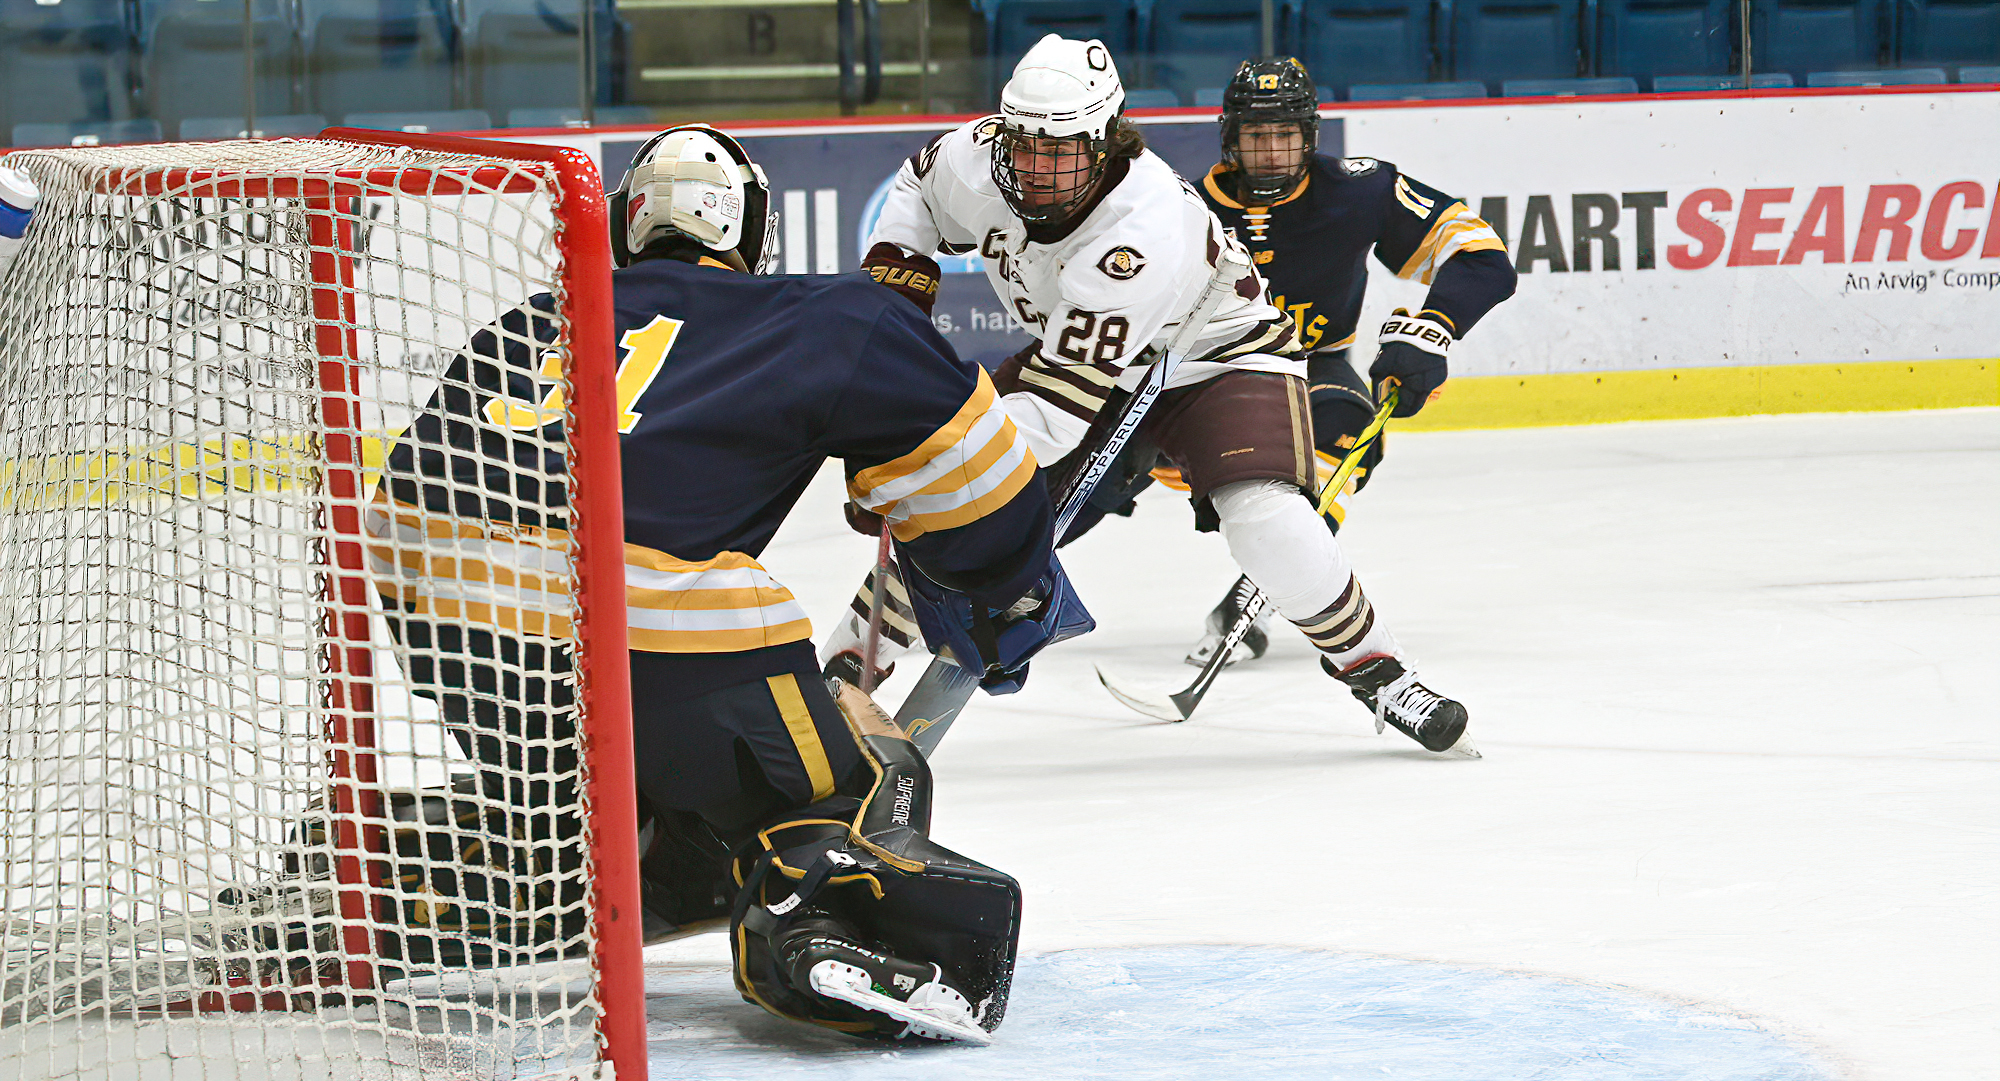 Caden Triggs drives toward the net in the Cobbers' series finale with #2 St. Scholastica. Triggs had a goal and an assist in the game.